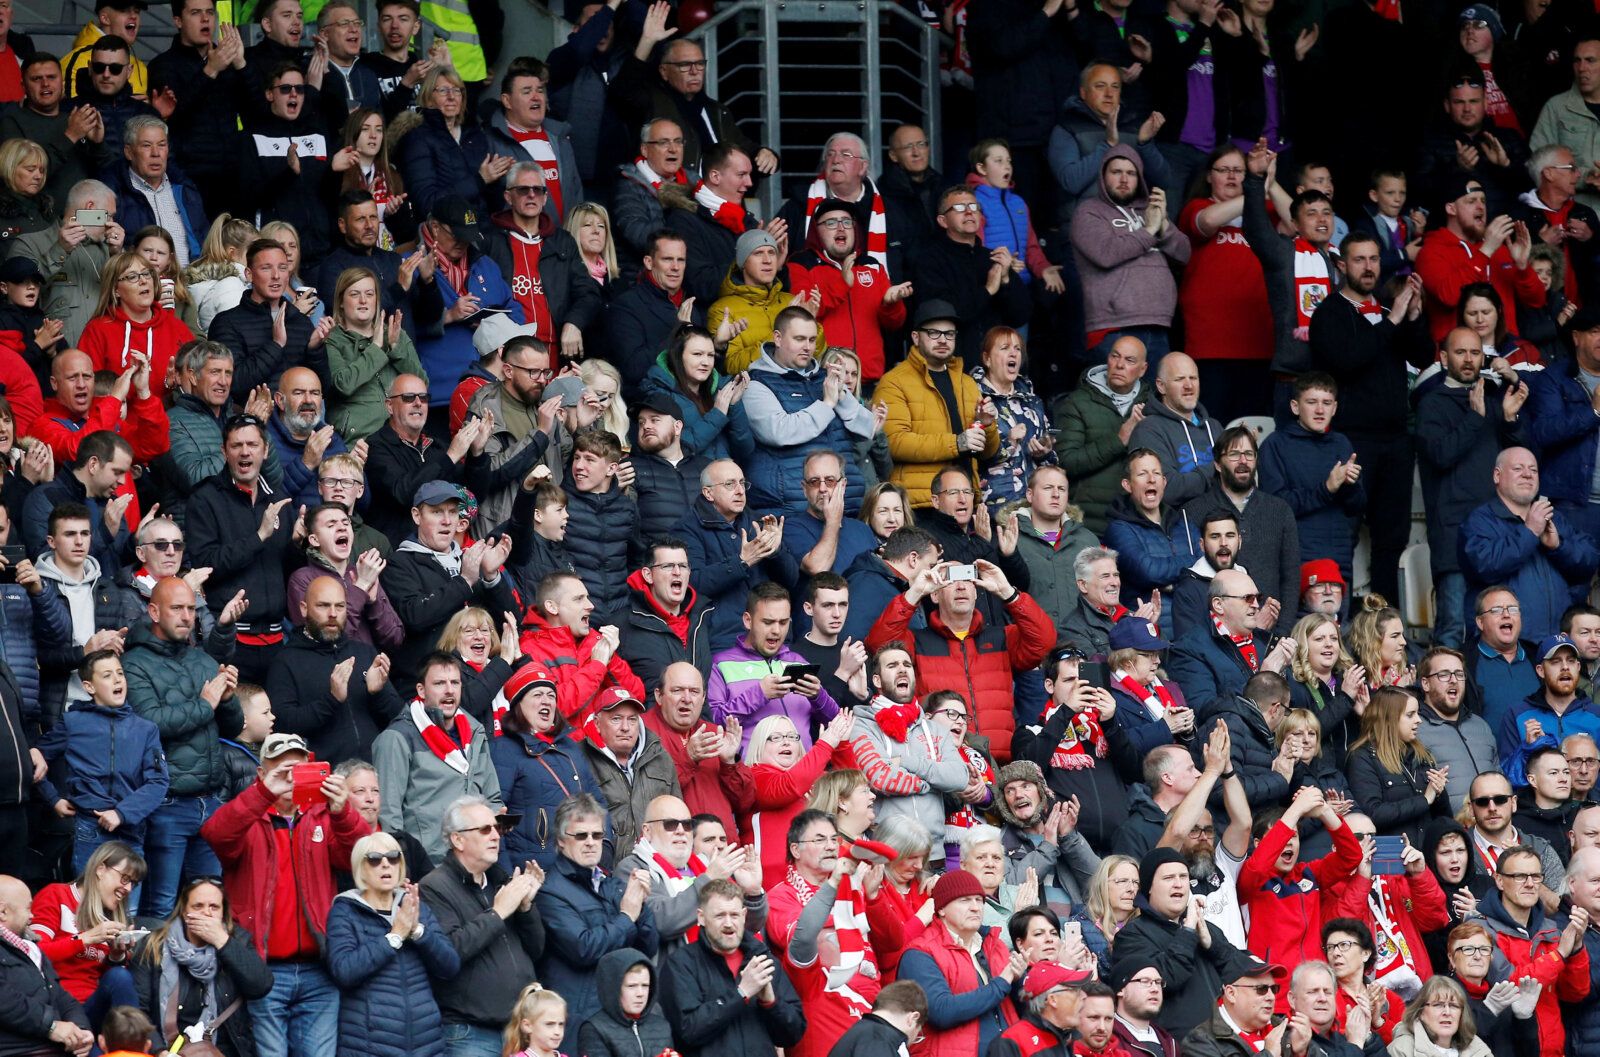 Soccer Football - Championship - Hull City v Bristol City - KCOM Stadium, Hull, Britain - May 5, 2019   General view of Bristol City fans inside the stadium    Action Images/Craig Brough    EDITORIAL USE ONLY. No use with unauthorized audio, video, data, fixture lists, club/league logos or 